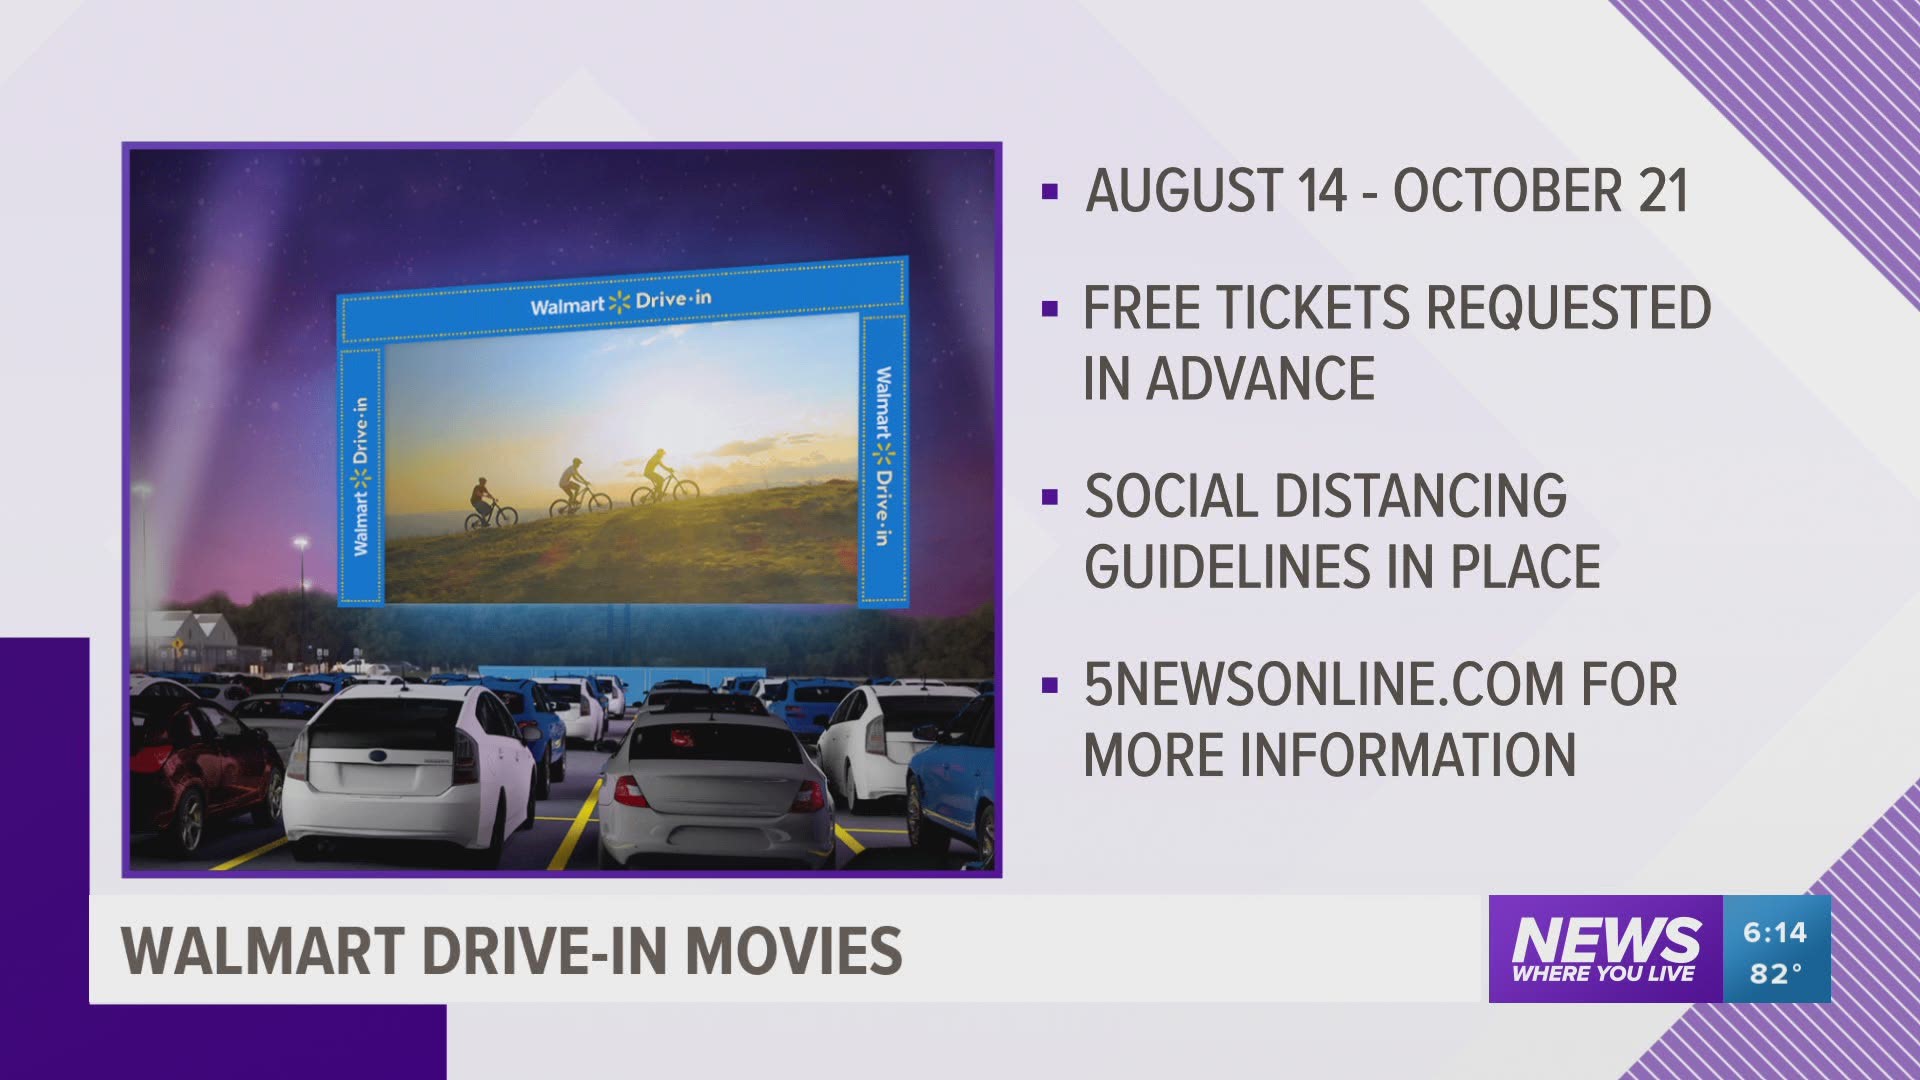 Dates and locations for Walmart's free drive-in movie events have been released. https://bit.ly/39ZY8Rn